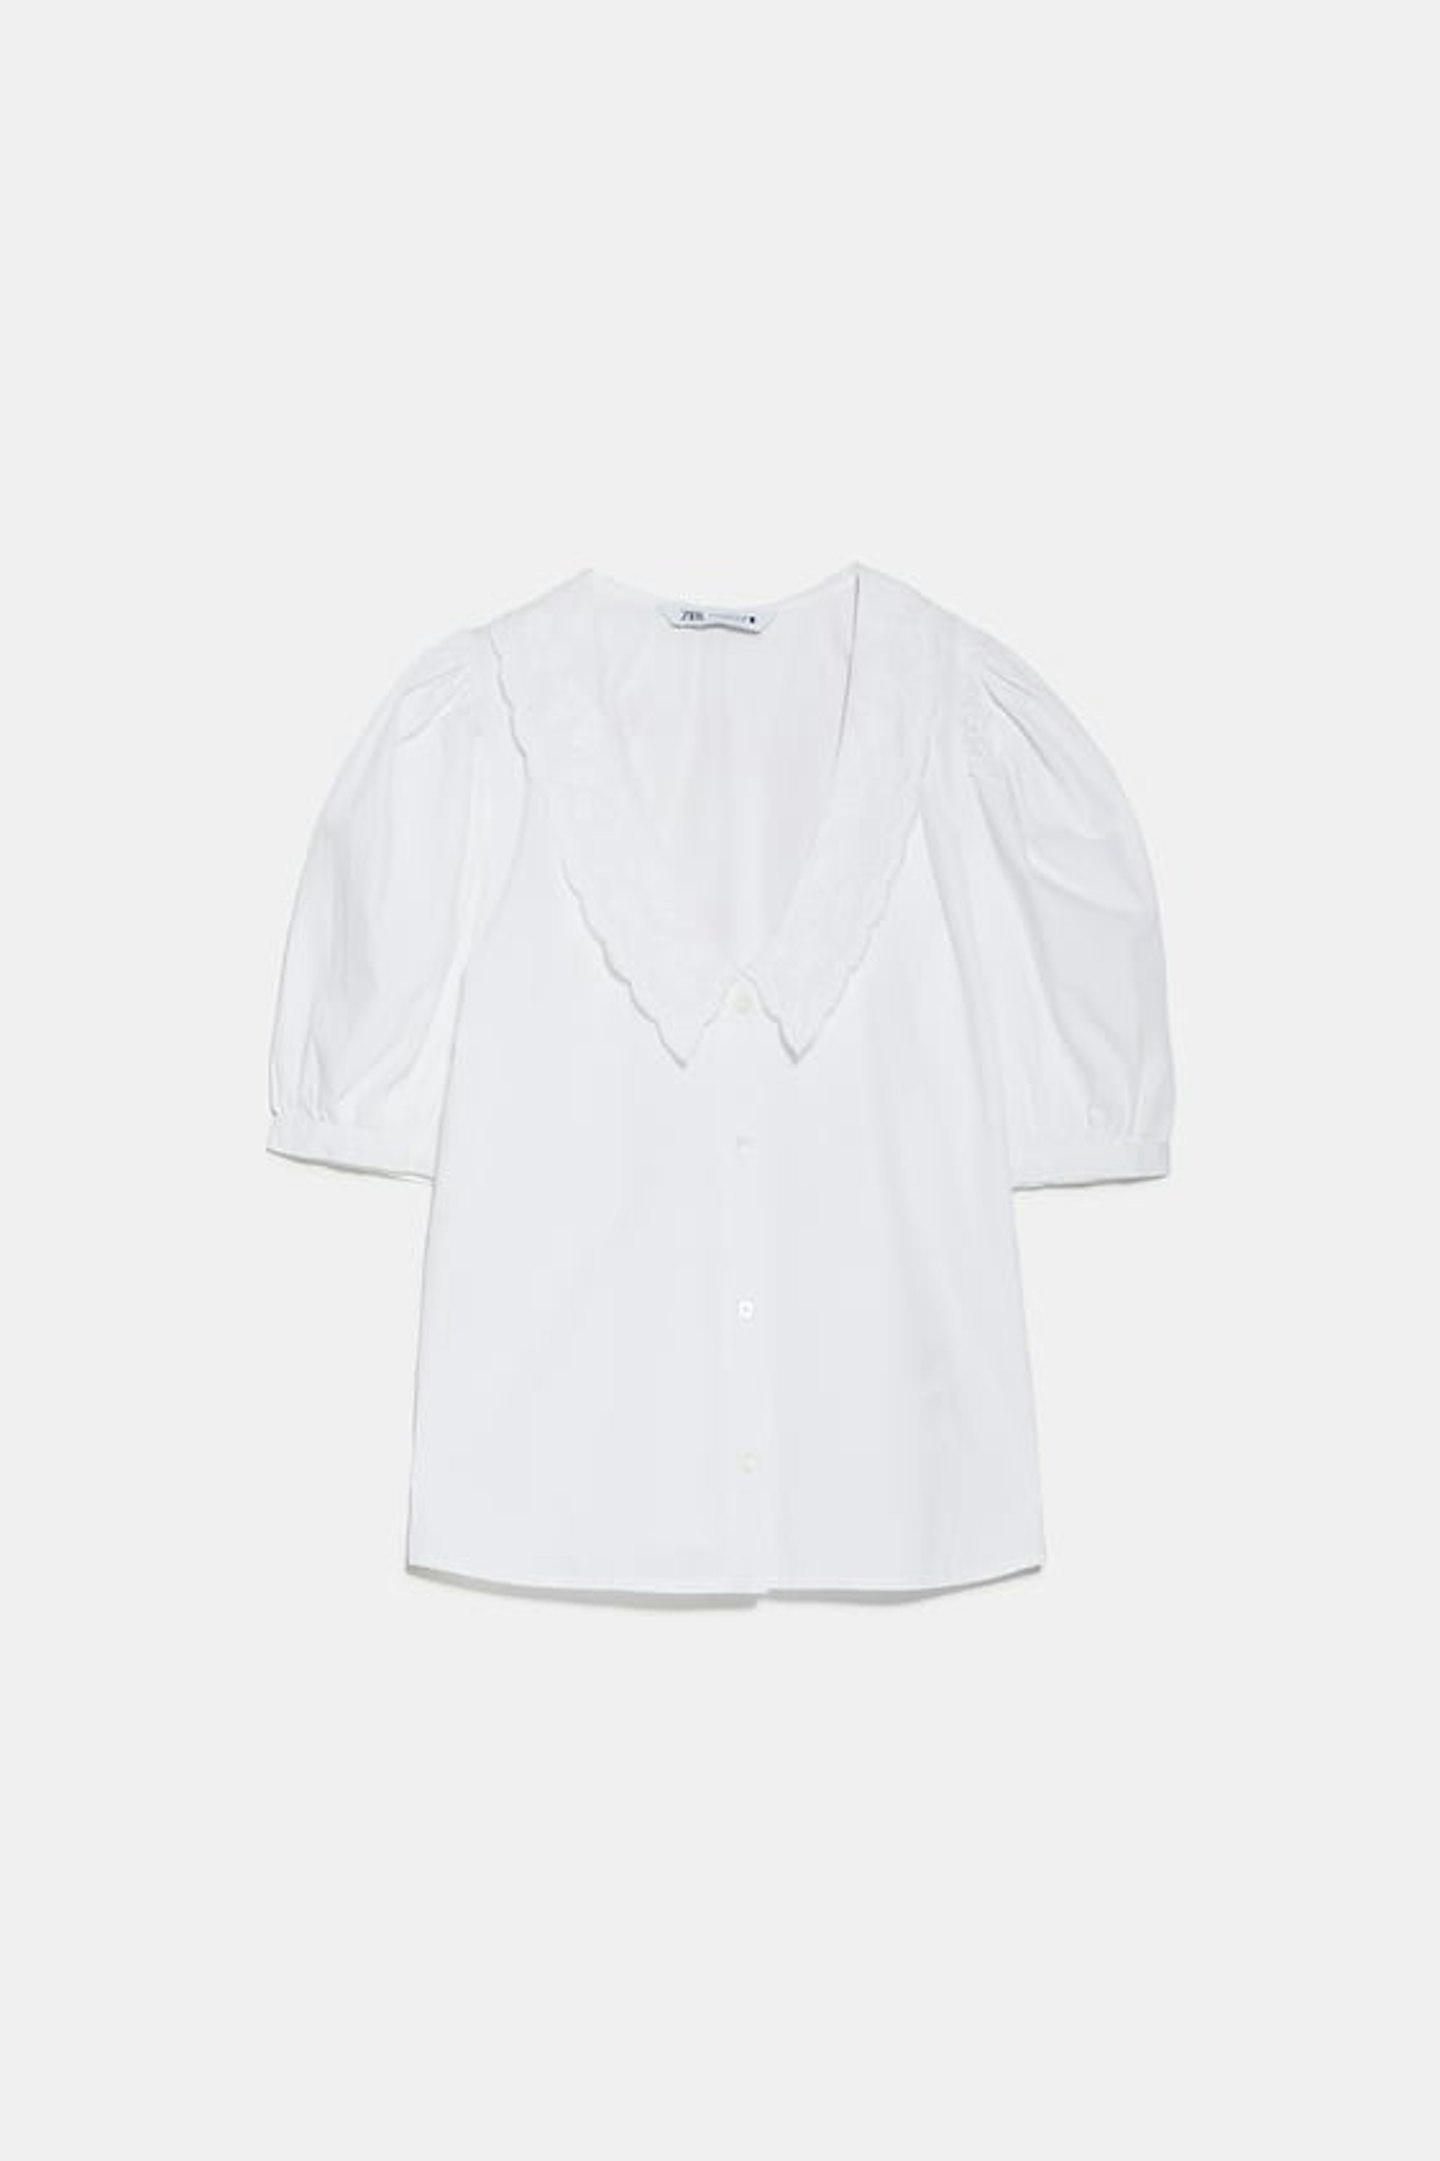 Zara, Poplin Blouse with Embroidered Collar, £19.99